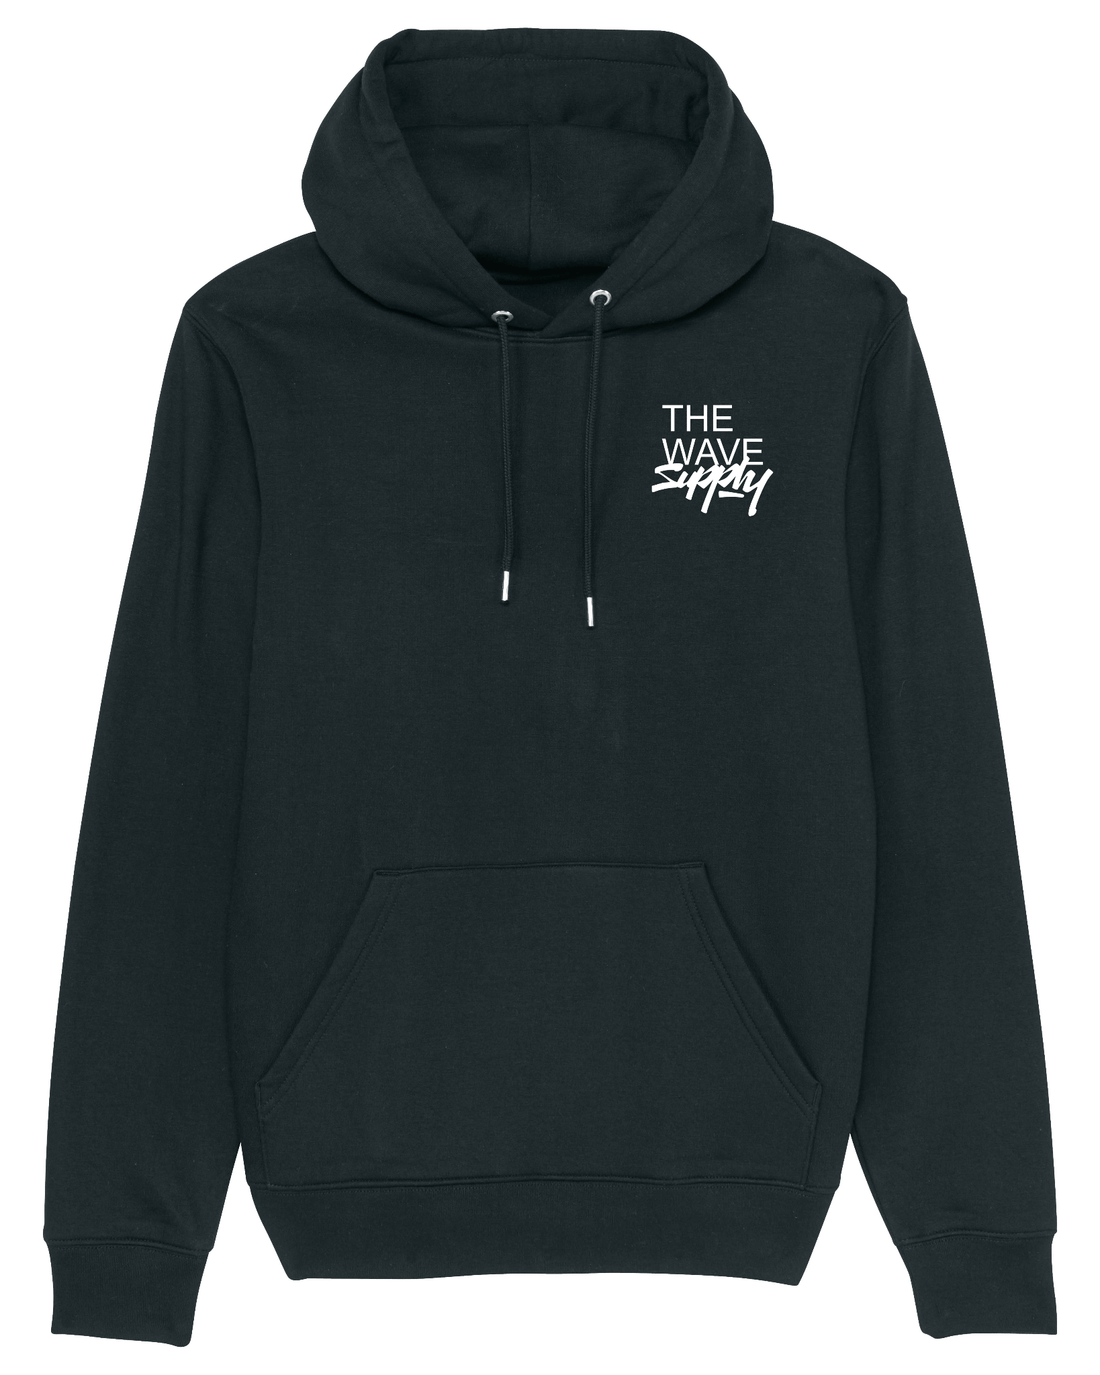 Black Skater Hoodie, Catch The Wave Front Print